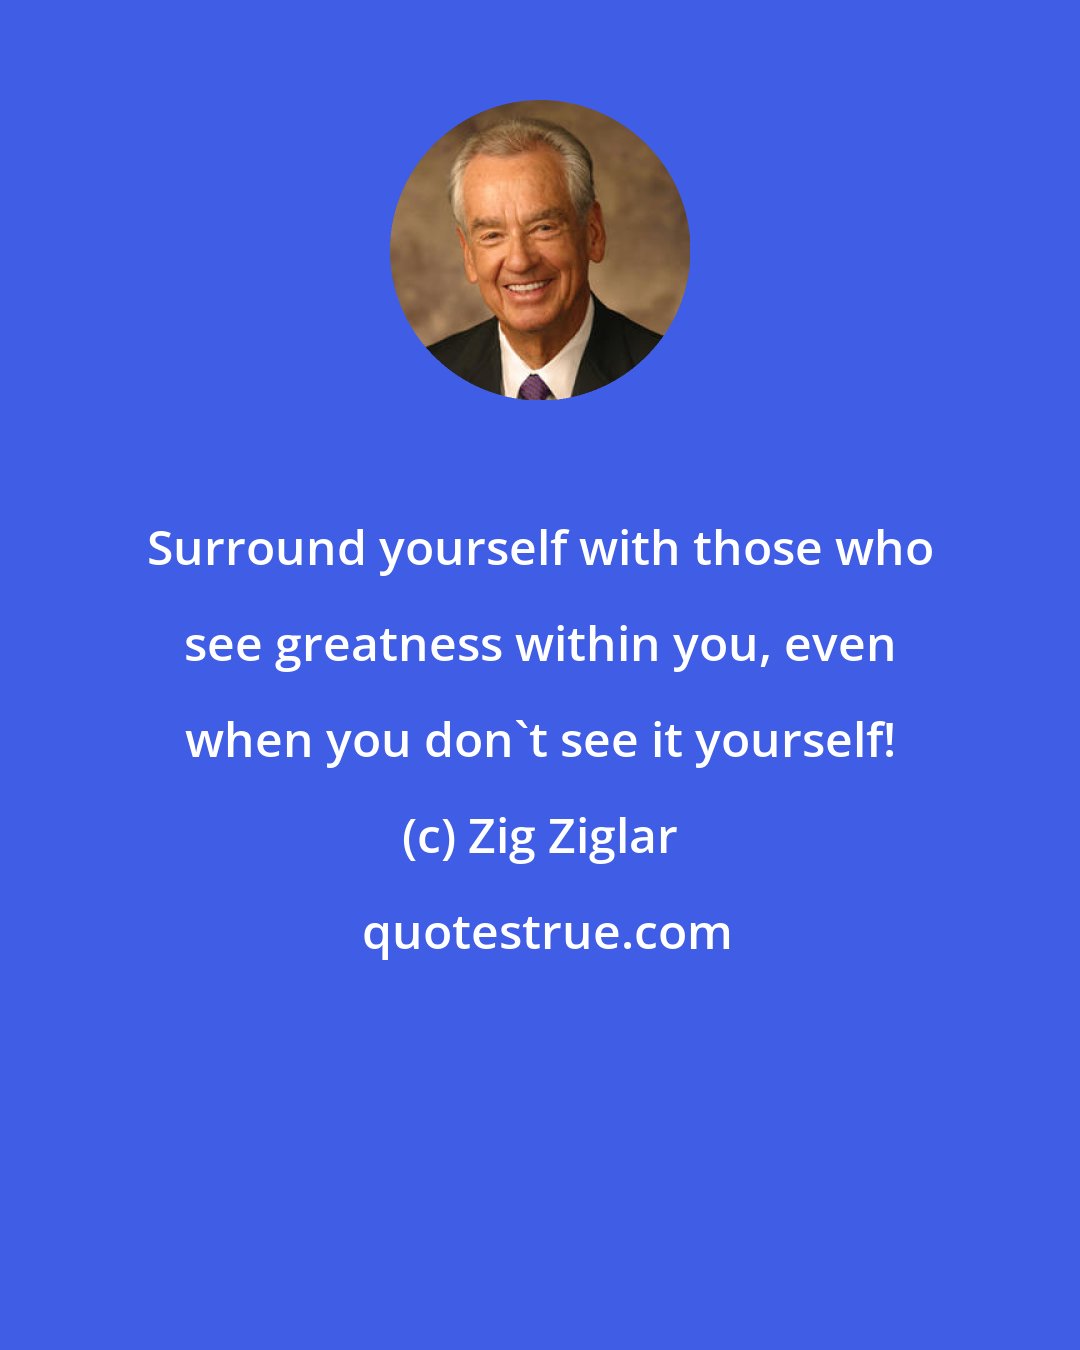 Zig Ziglar: Surround yourself with those who see greatness within you, even when you don't see it yourself!